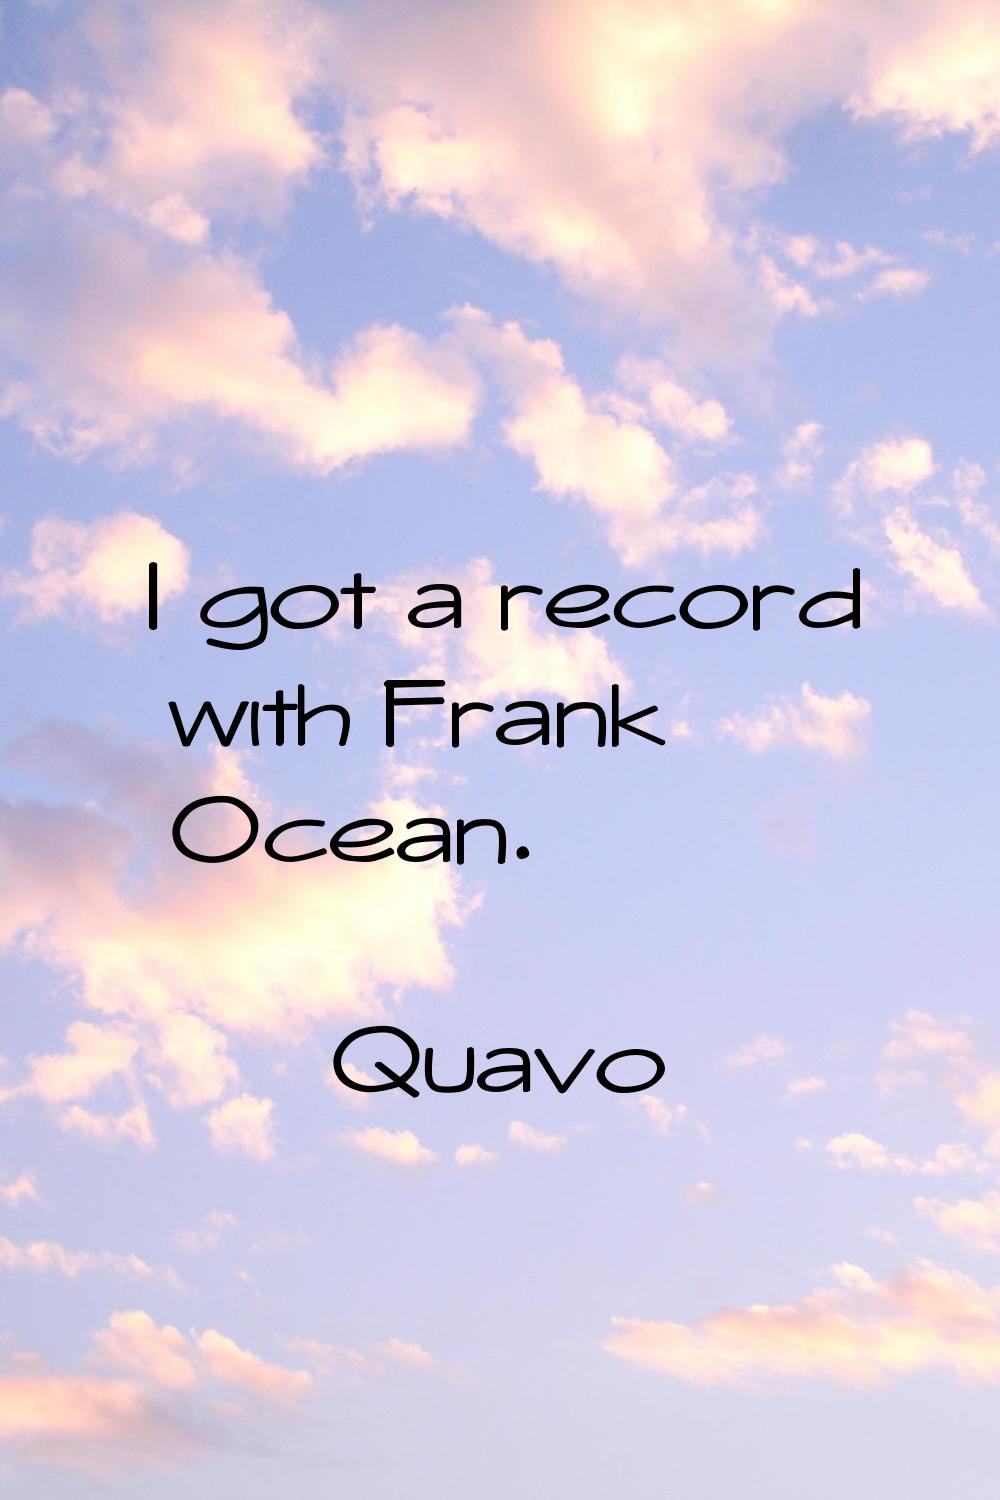 I got a record with Frank Ocean.